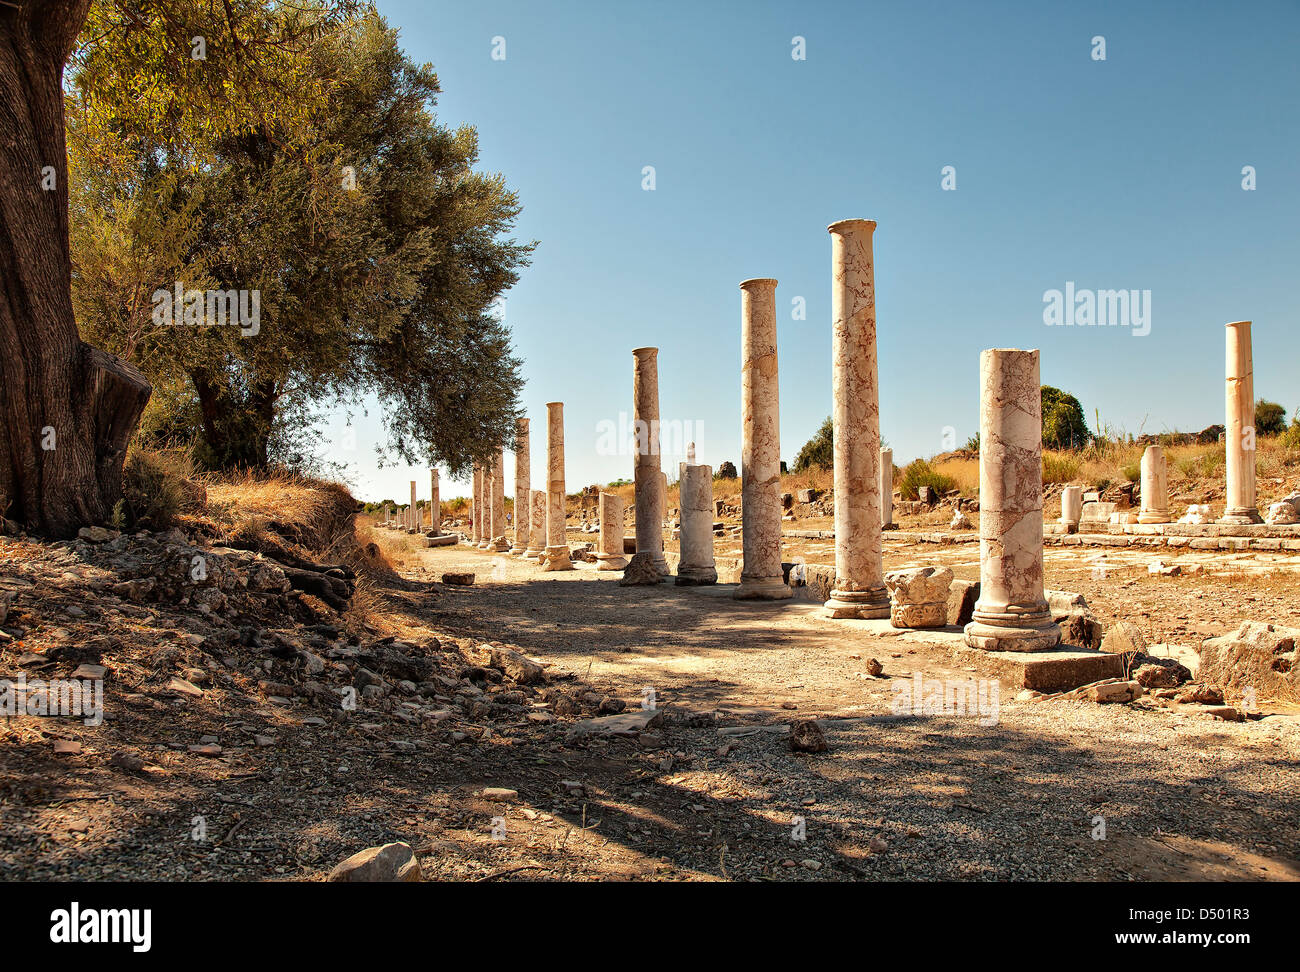 On of the colonnaded streets from ancient times amongst the ruins of ancient Side, Turkey. Stock Photo